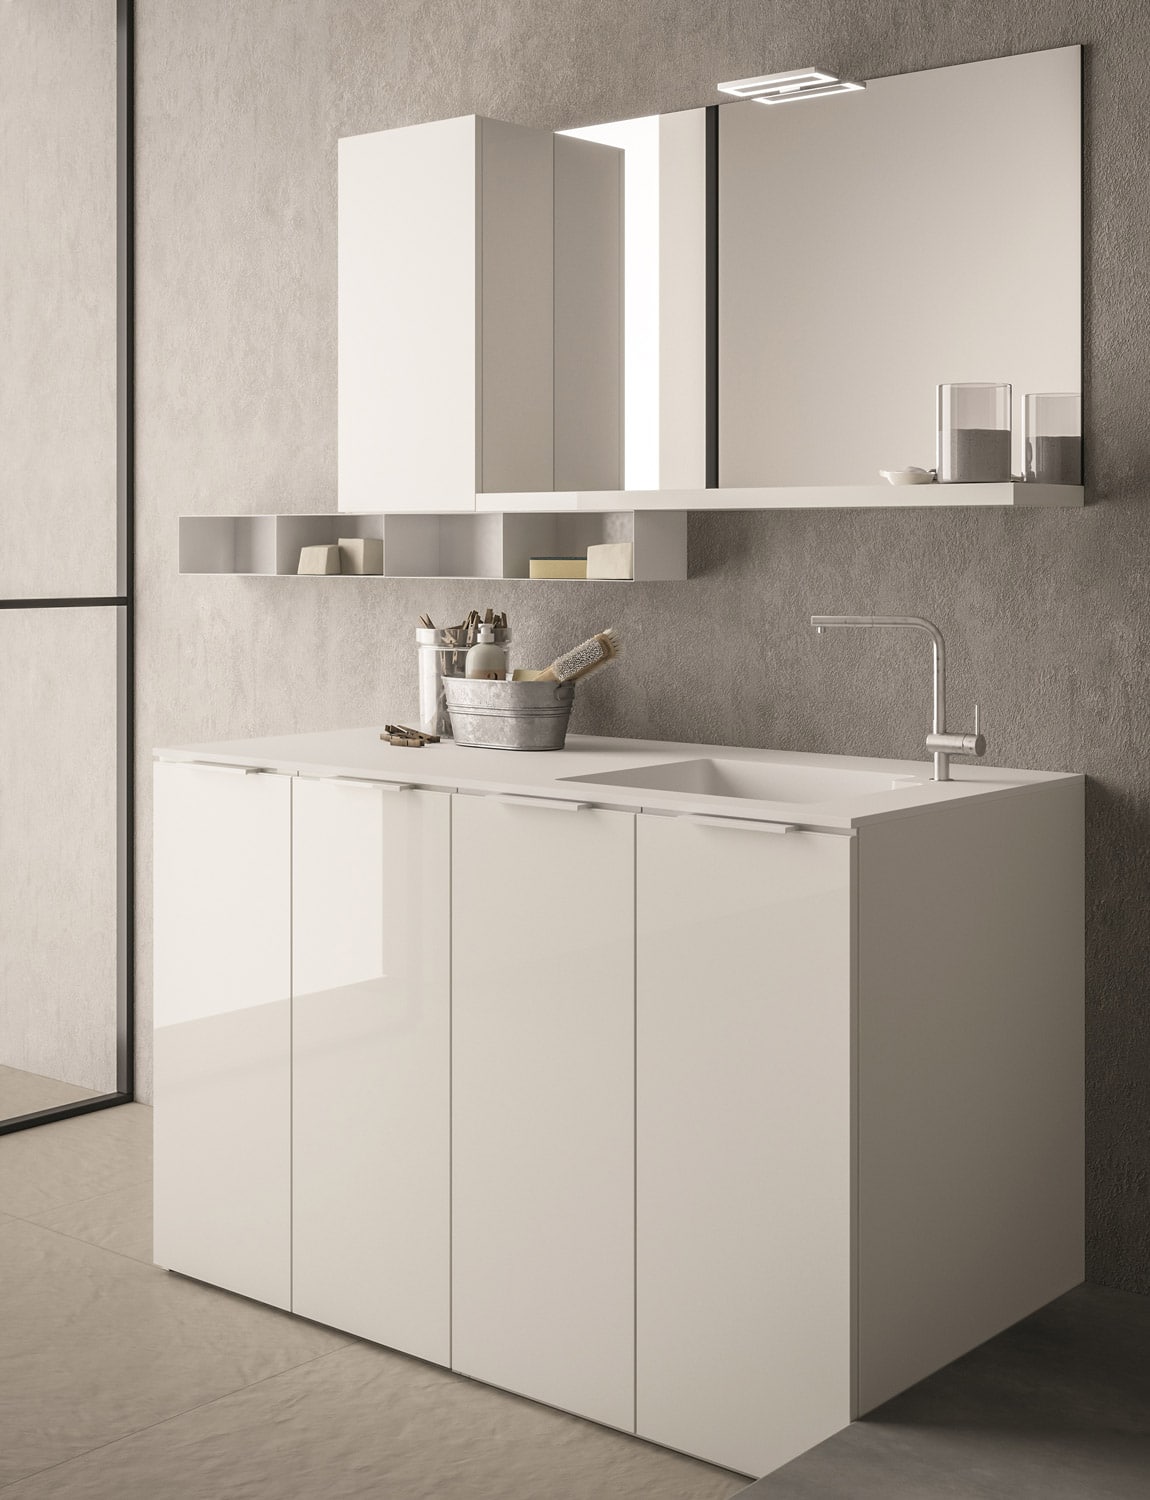 With Drop, you can match bathroom and laundry room through a unified aesthetic and flexible use of the space. 